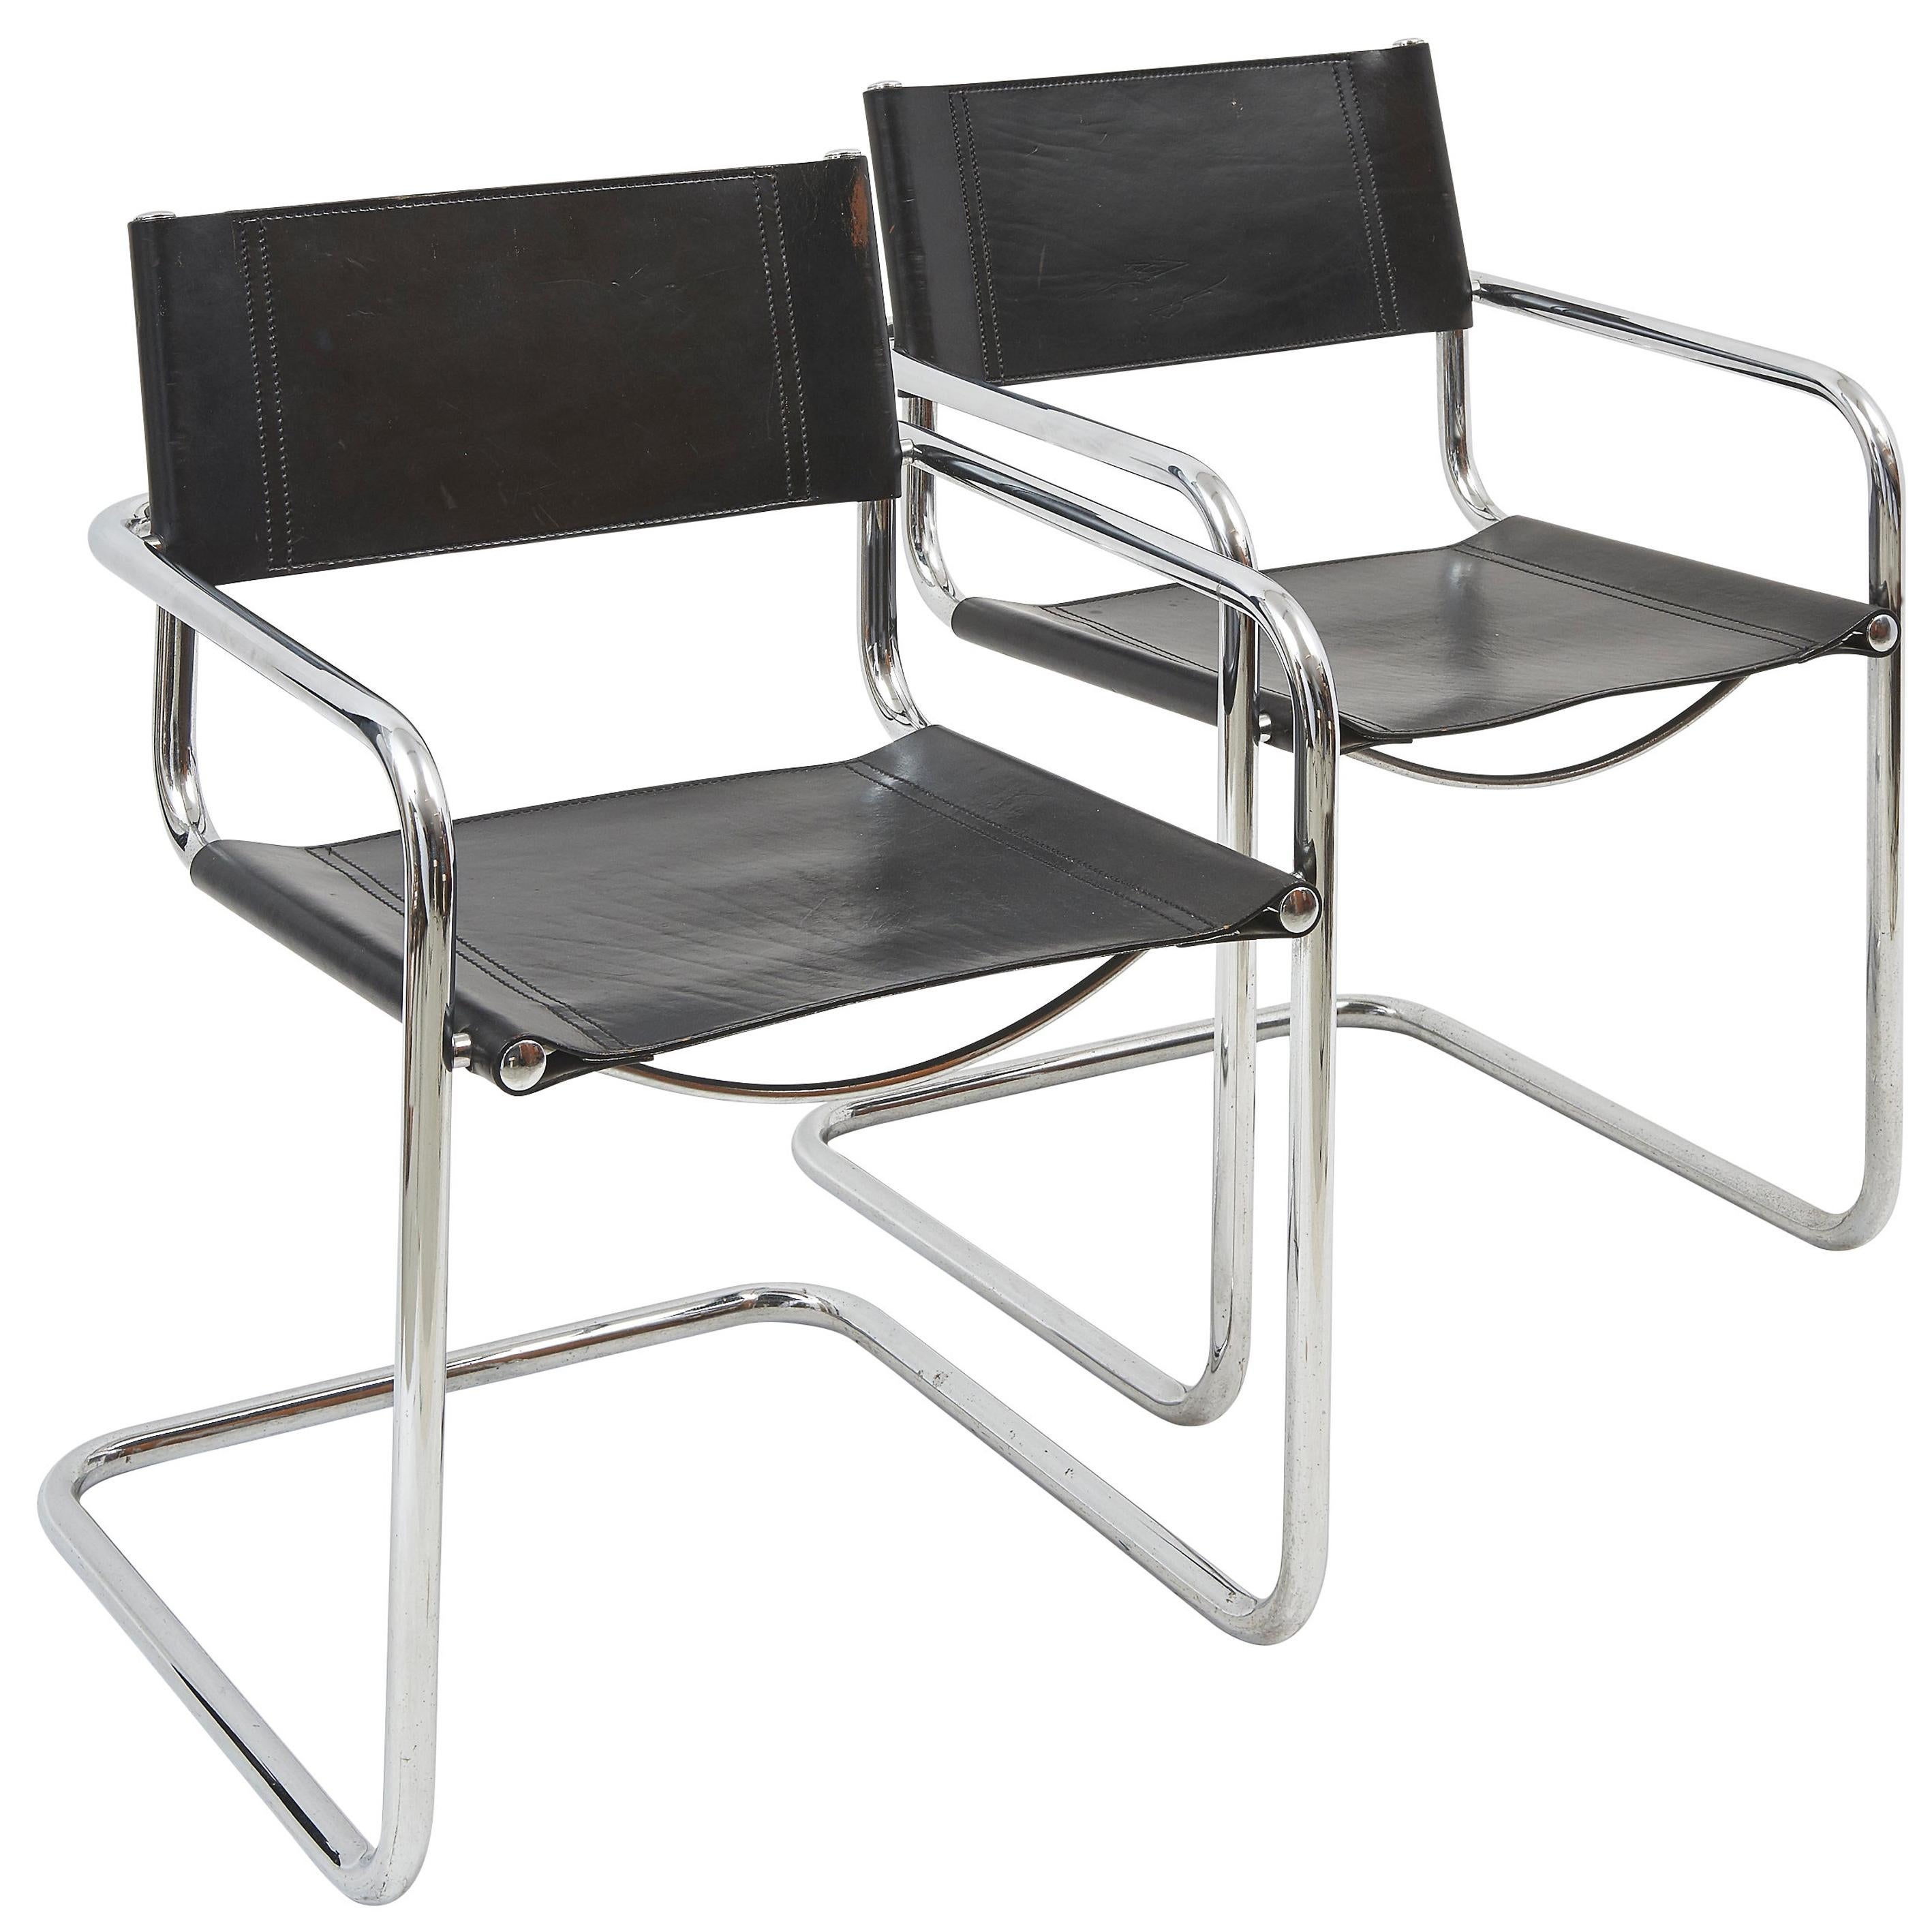 Pair of Cantilevered Chrome and Leather Armchairs after Mart Stam, c.1973